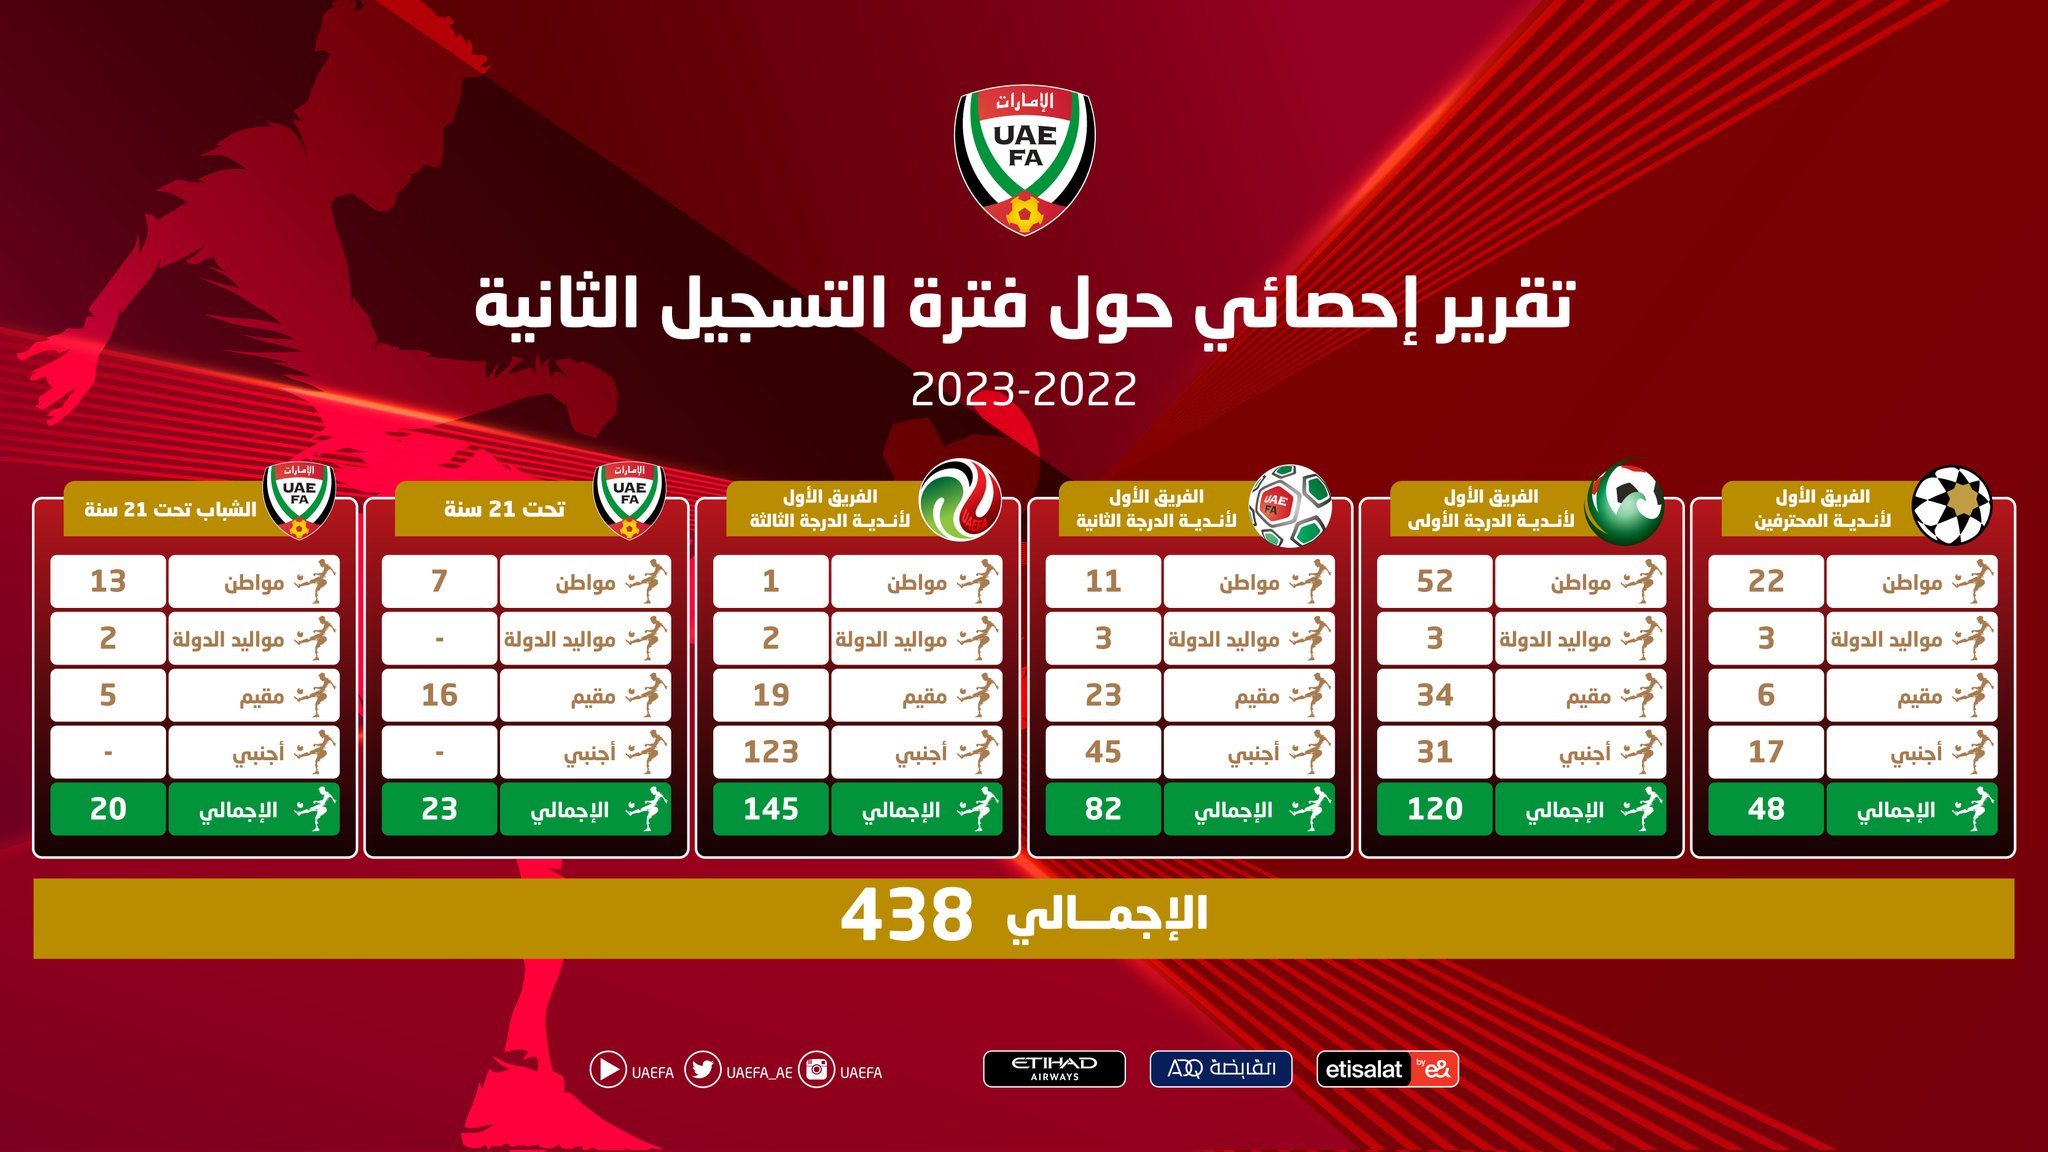 438 registration and registration transactions during the “winter transfers”… of which 48 are for “professionals”